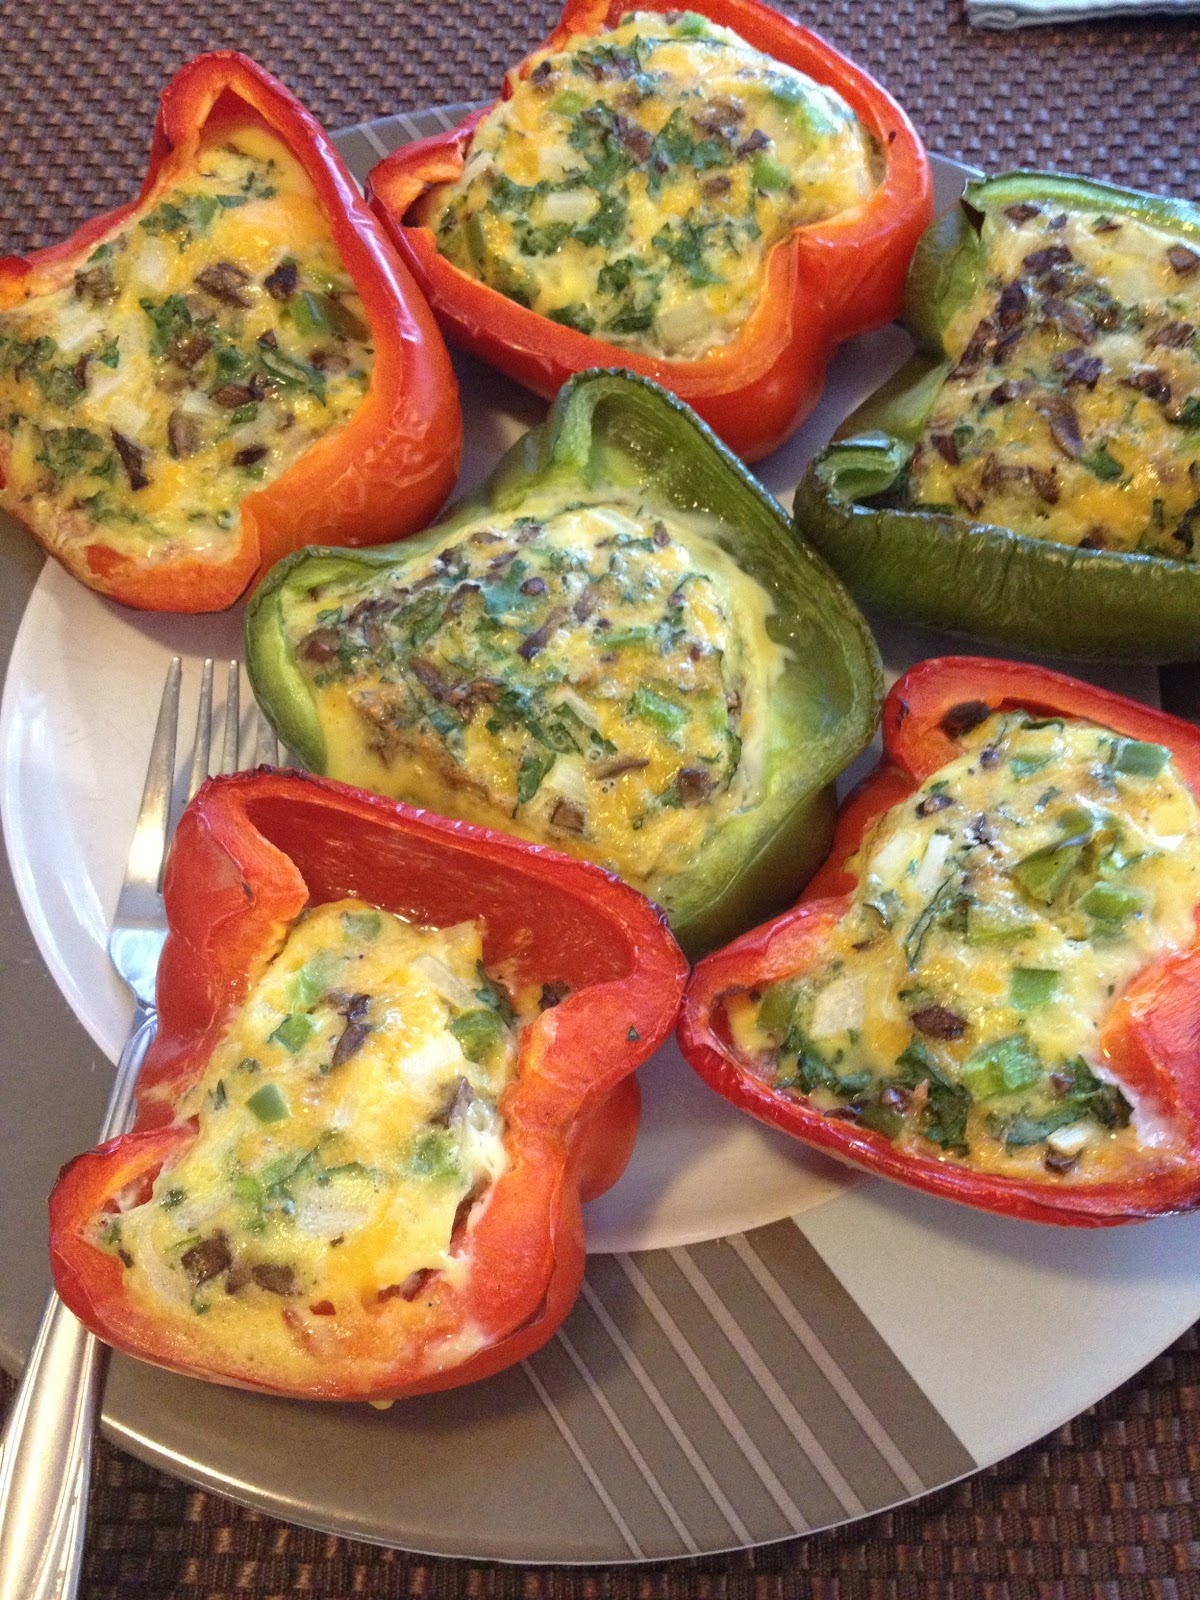 realfood4realkids: Egg Stuffed Peppers